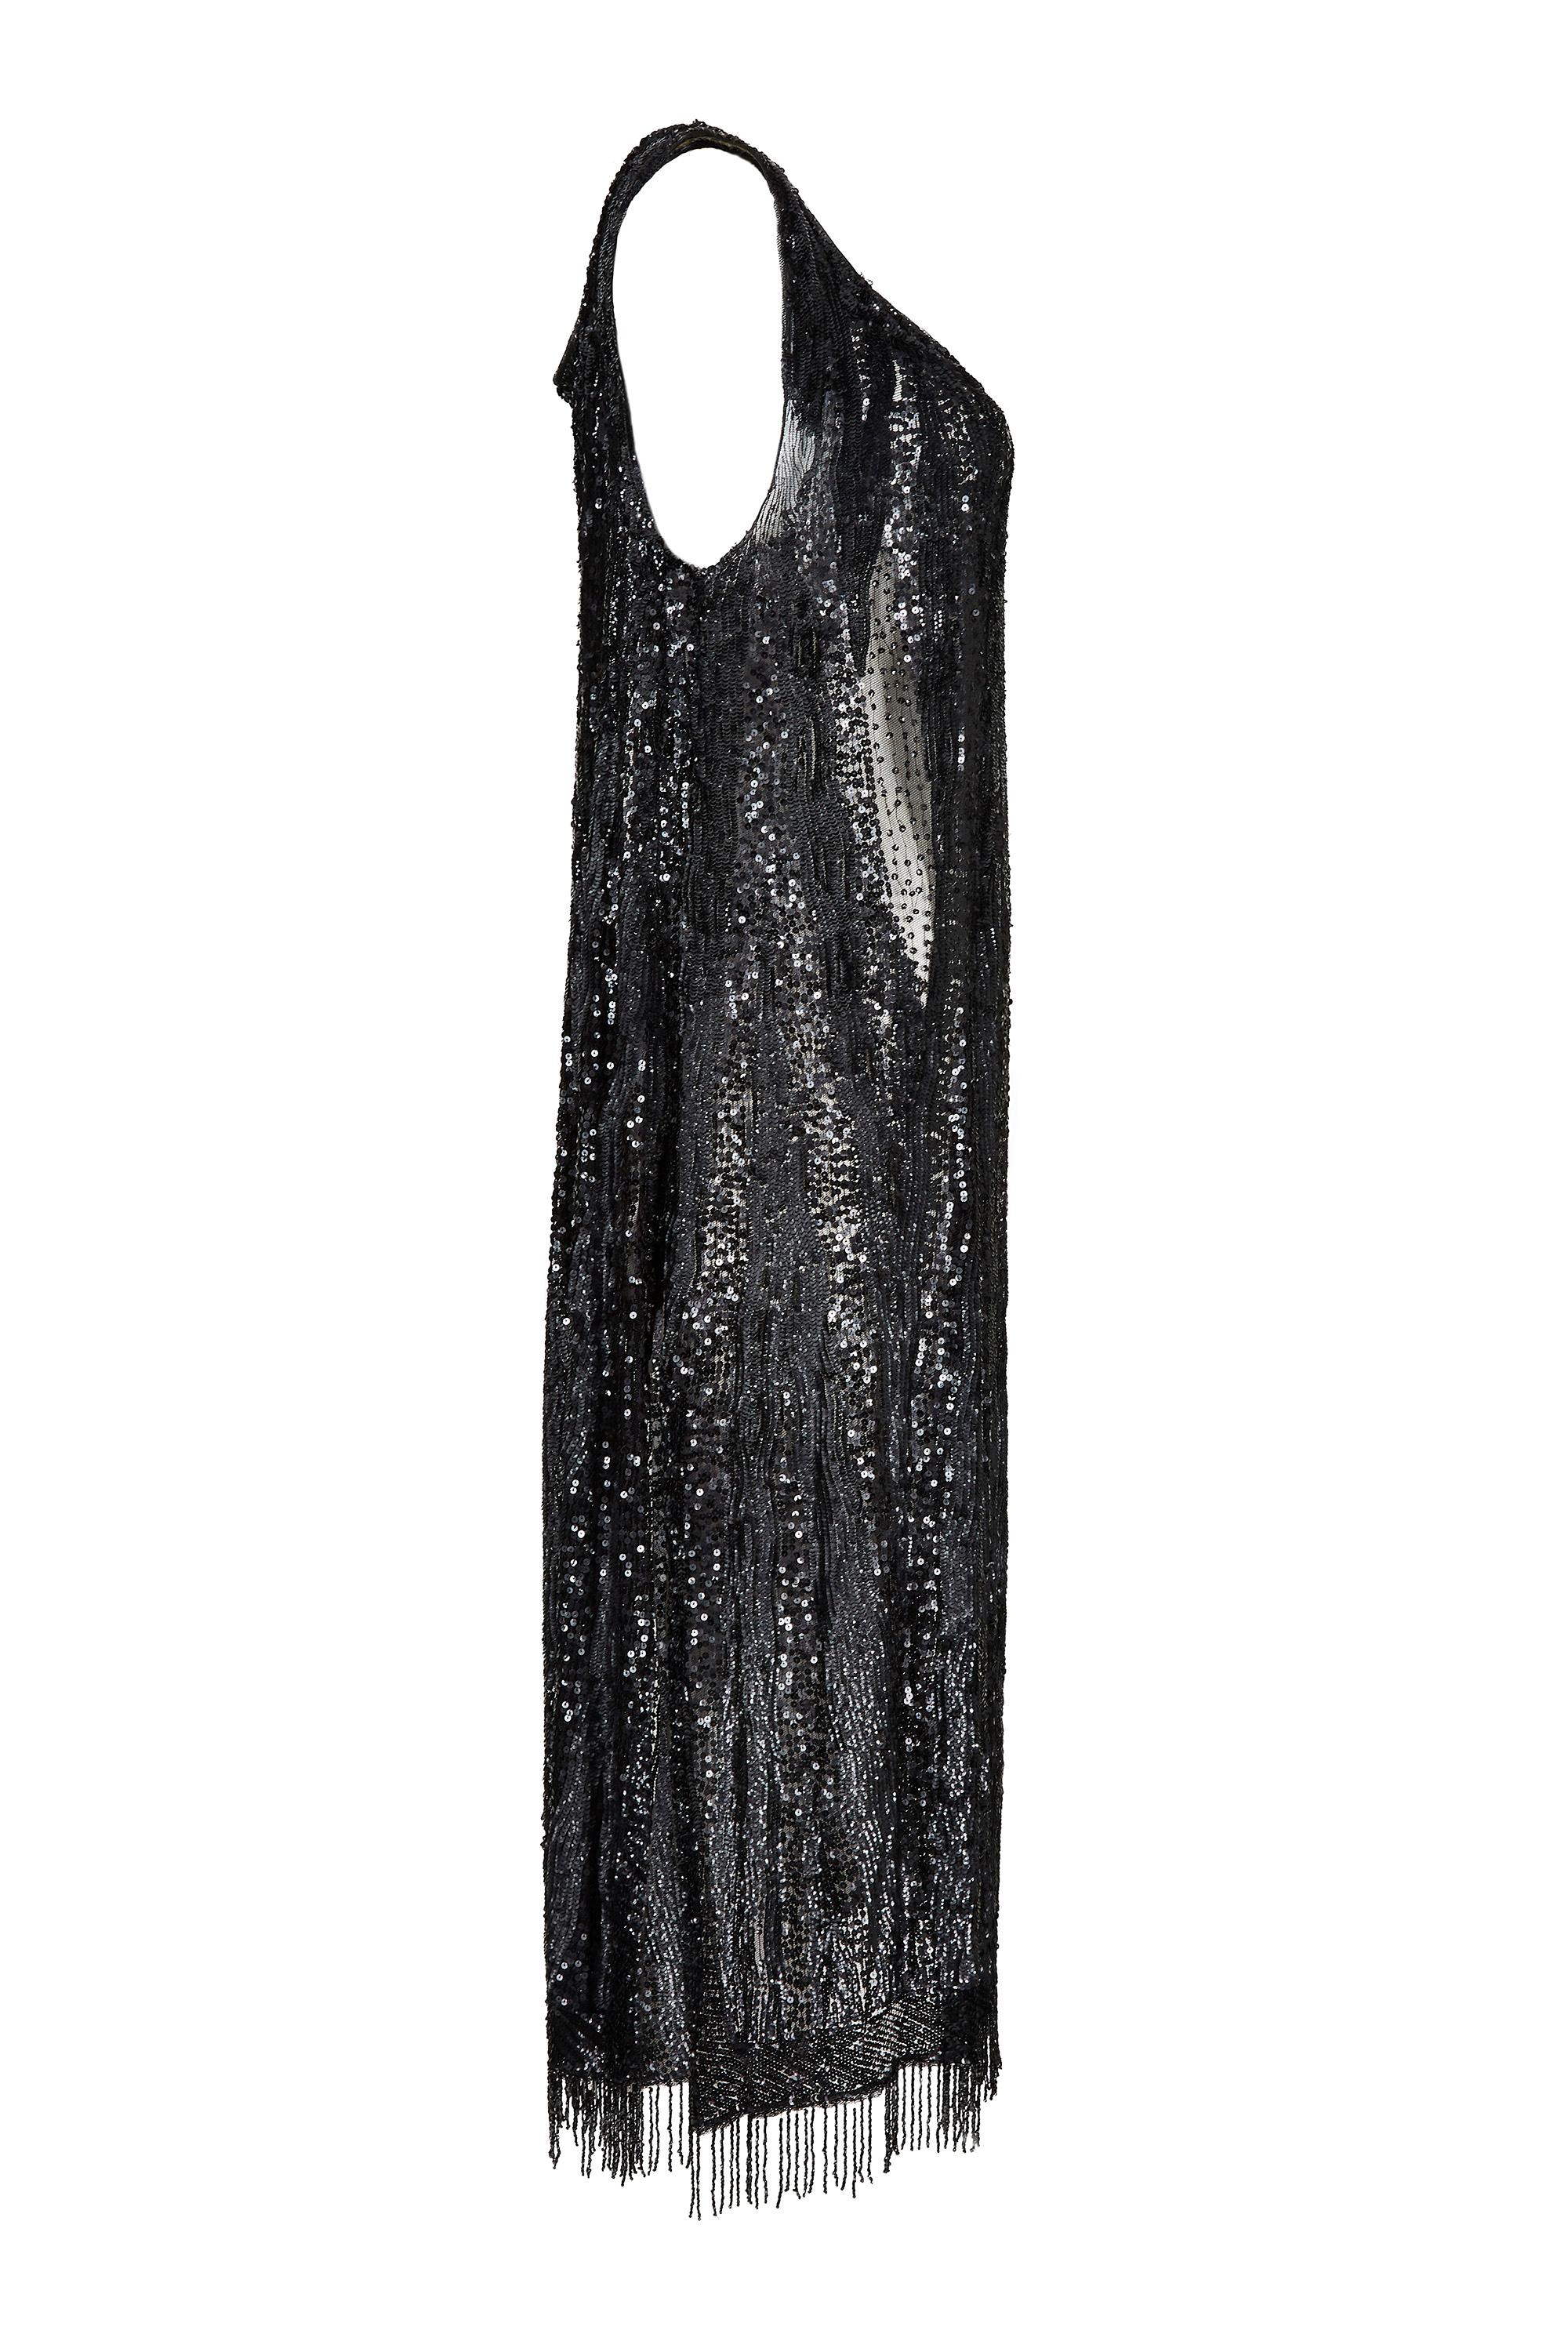 This original 1920s little black dress is an unlabelled haute couture example, fully sequinned all over and in truly excellent antique condition. Tailored to a timeless flapper silhouette, this exquisite tabard gown has a gentle scope neckline,